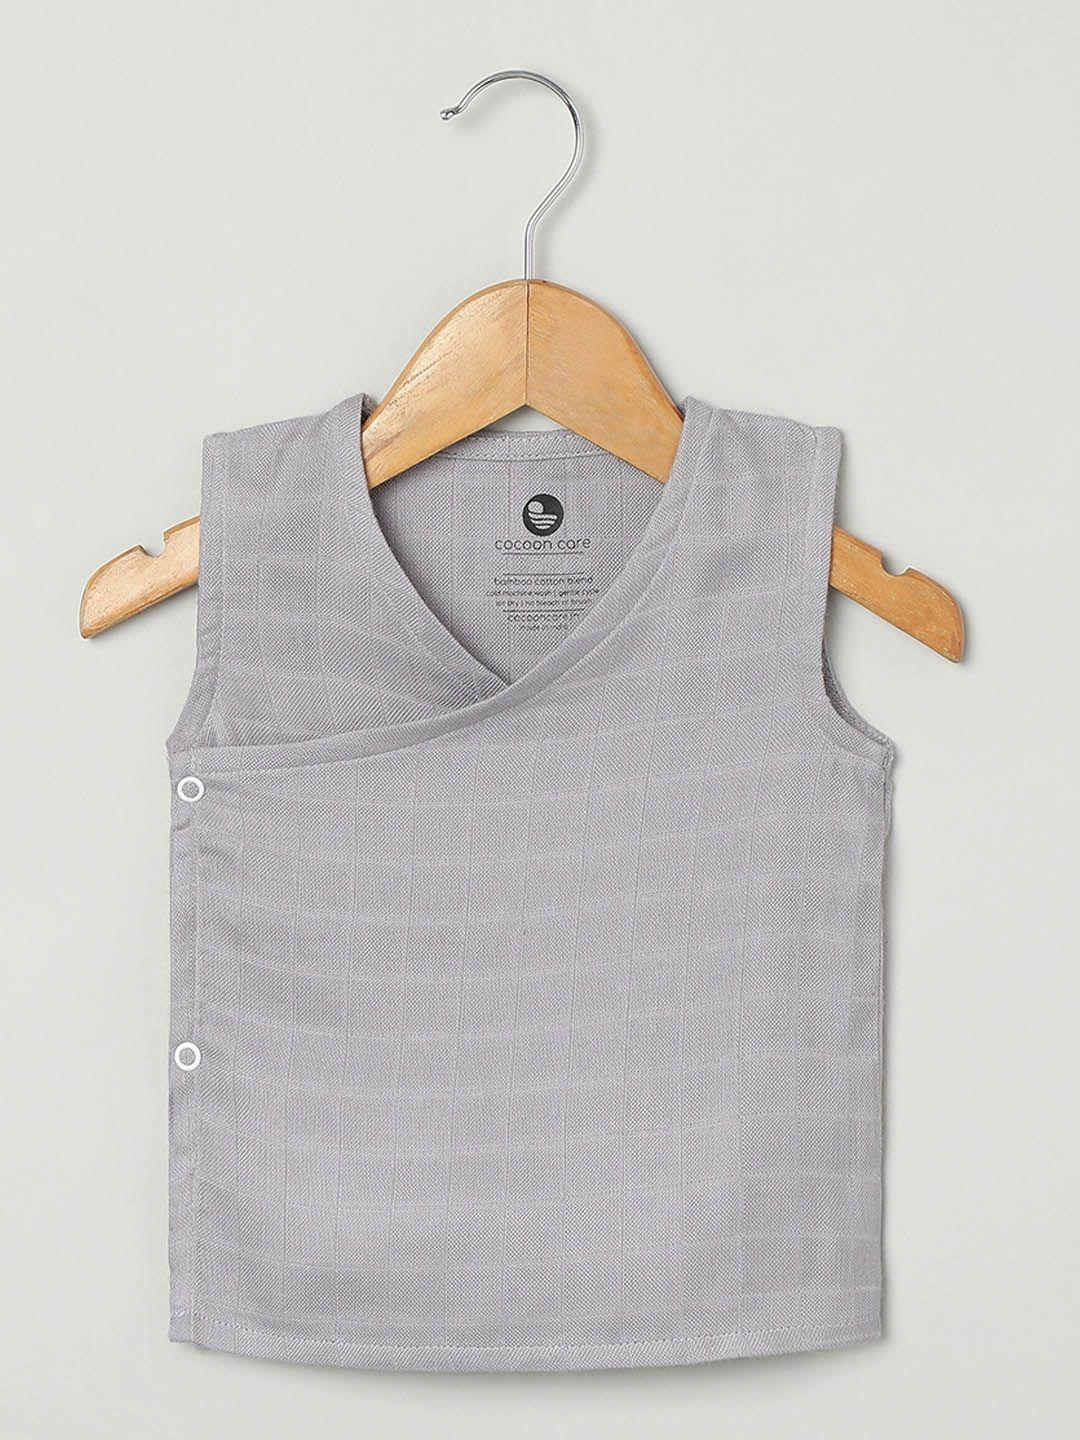 cocoon care infants striped bamboo basic vests